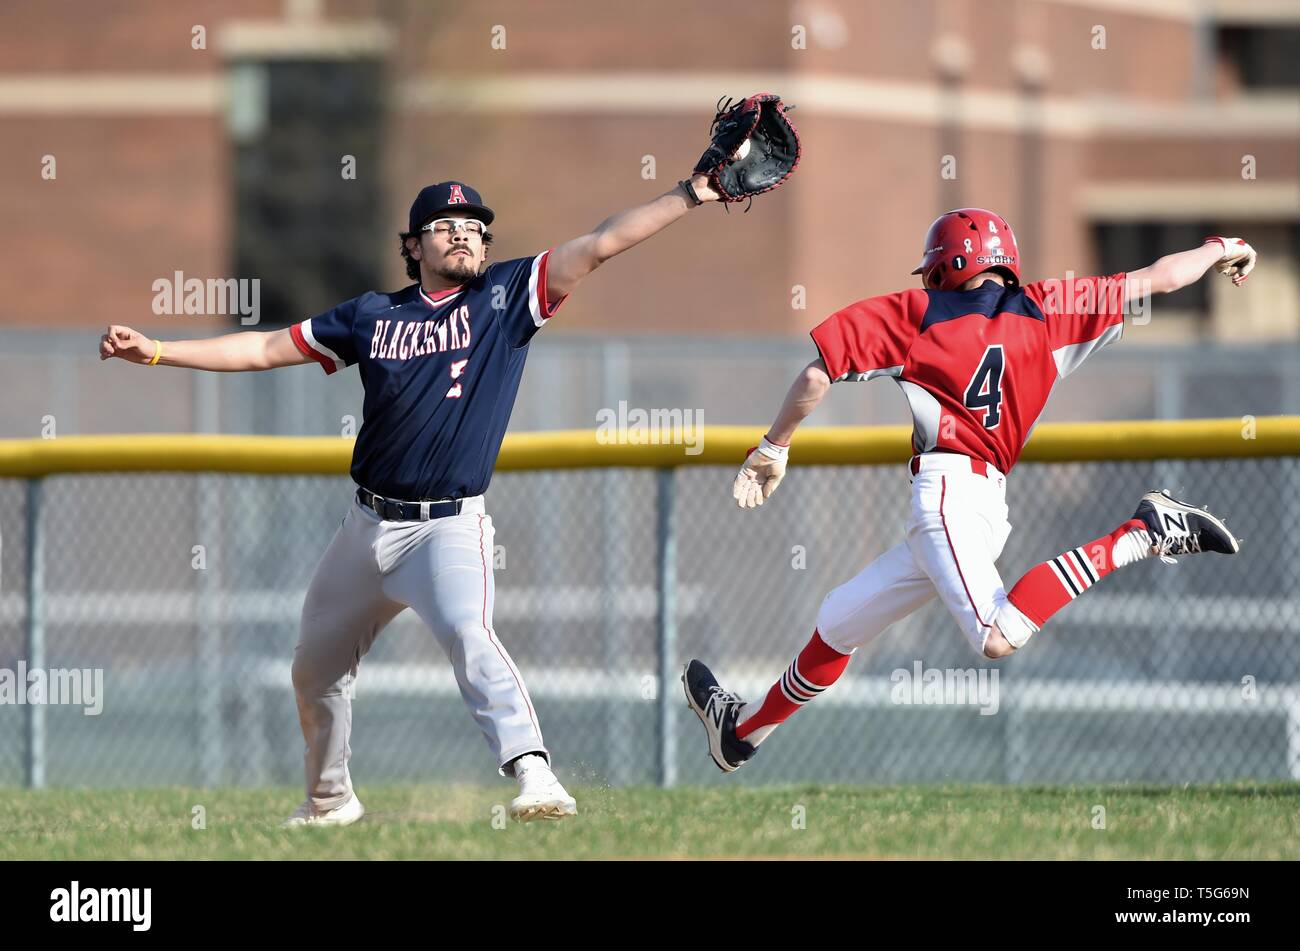 Base runner being retired on a close play at first base as the first baseman stretched to accept the throw. USA. Stock Photo